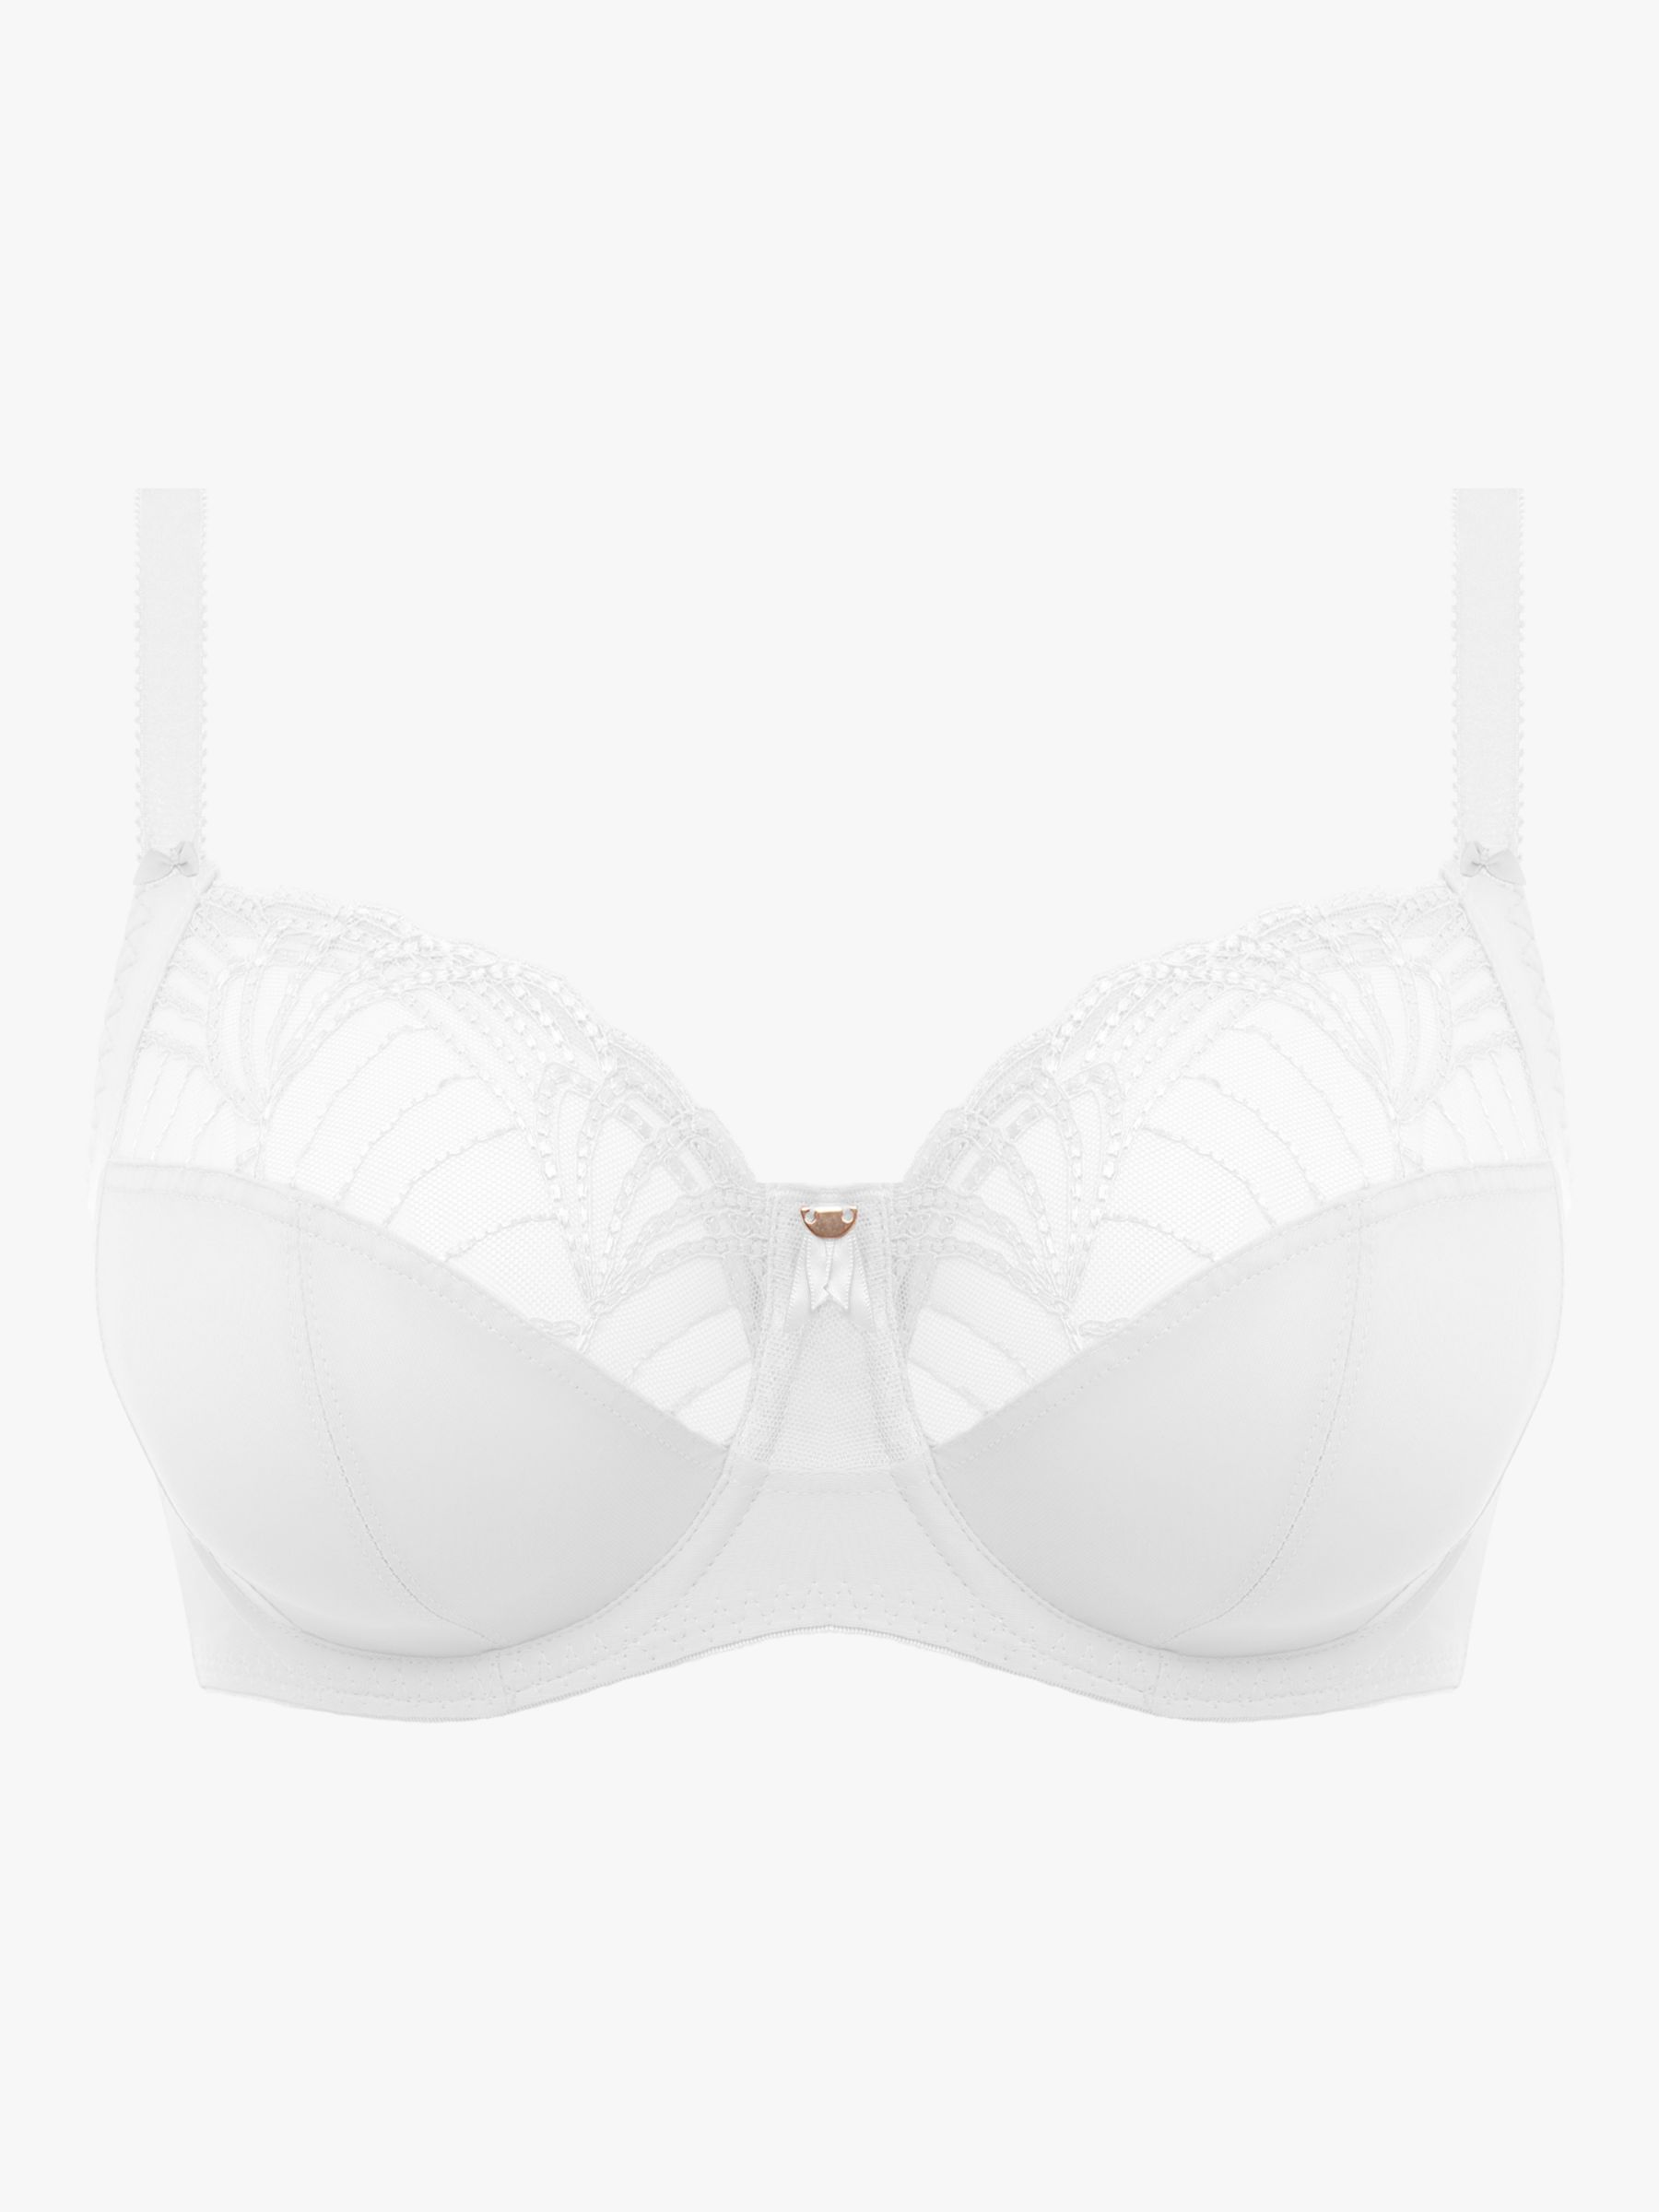 Fantasie Adelle Bra Side Support Underwired Full Cup Bras Recycled